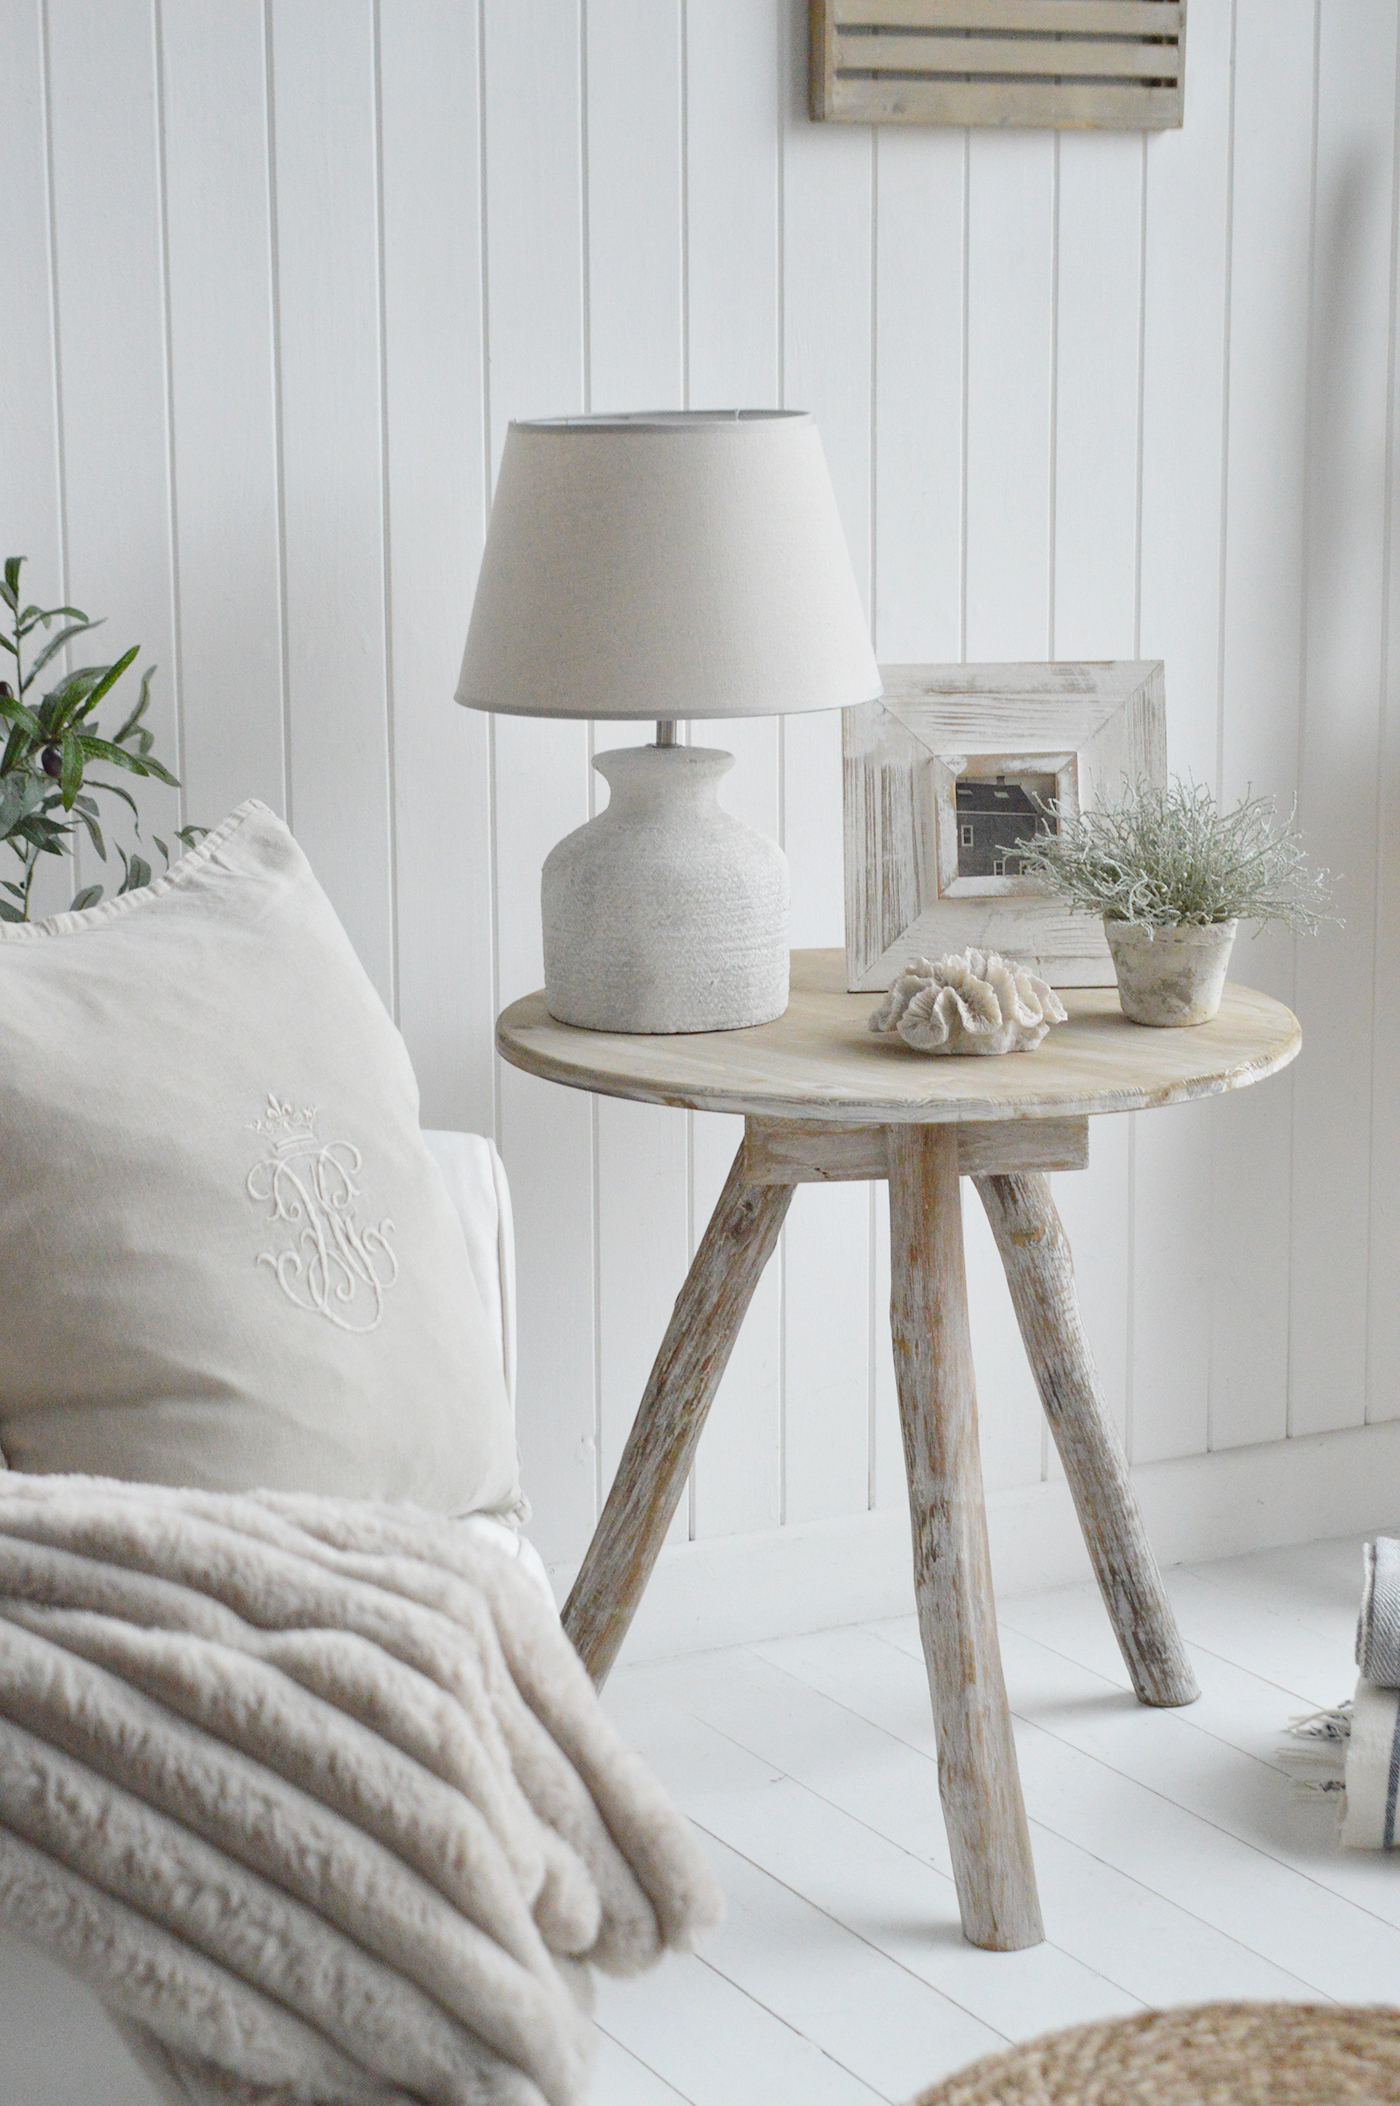 The driftwood wooden side table in a neutrally inspired modern country home interior